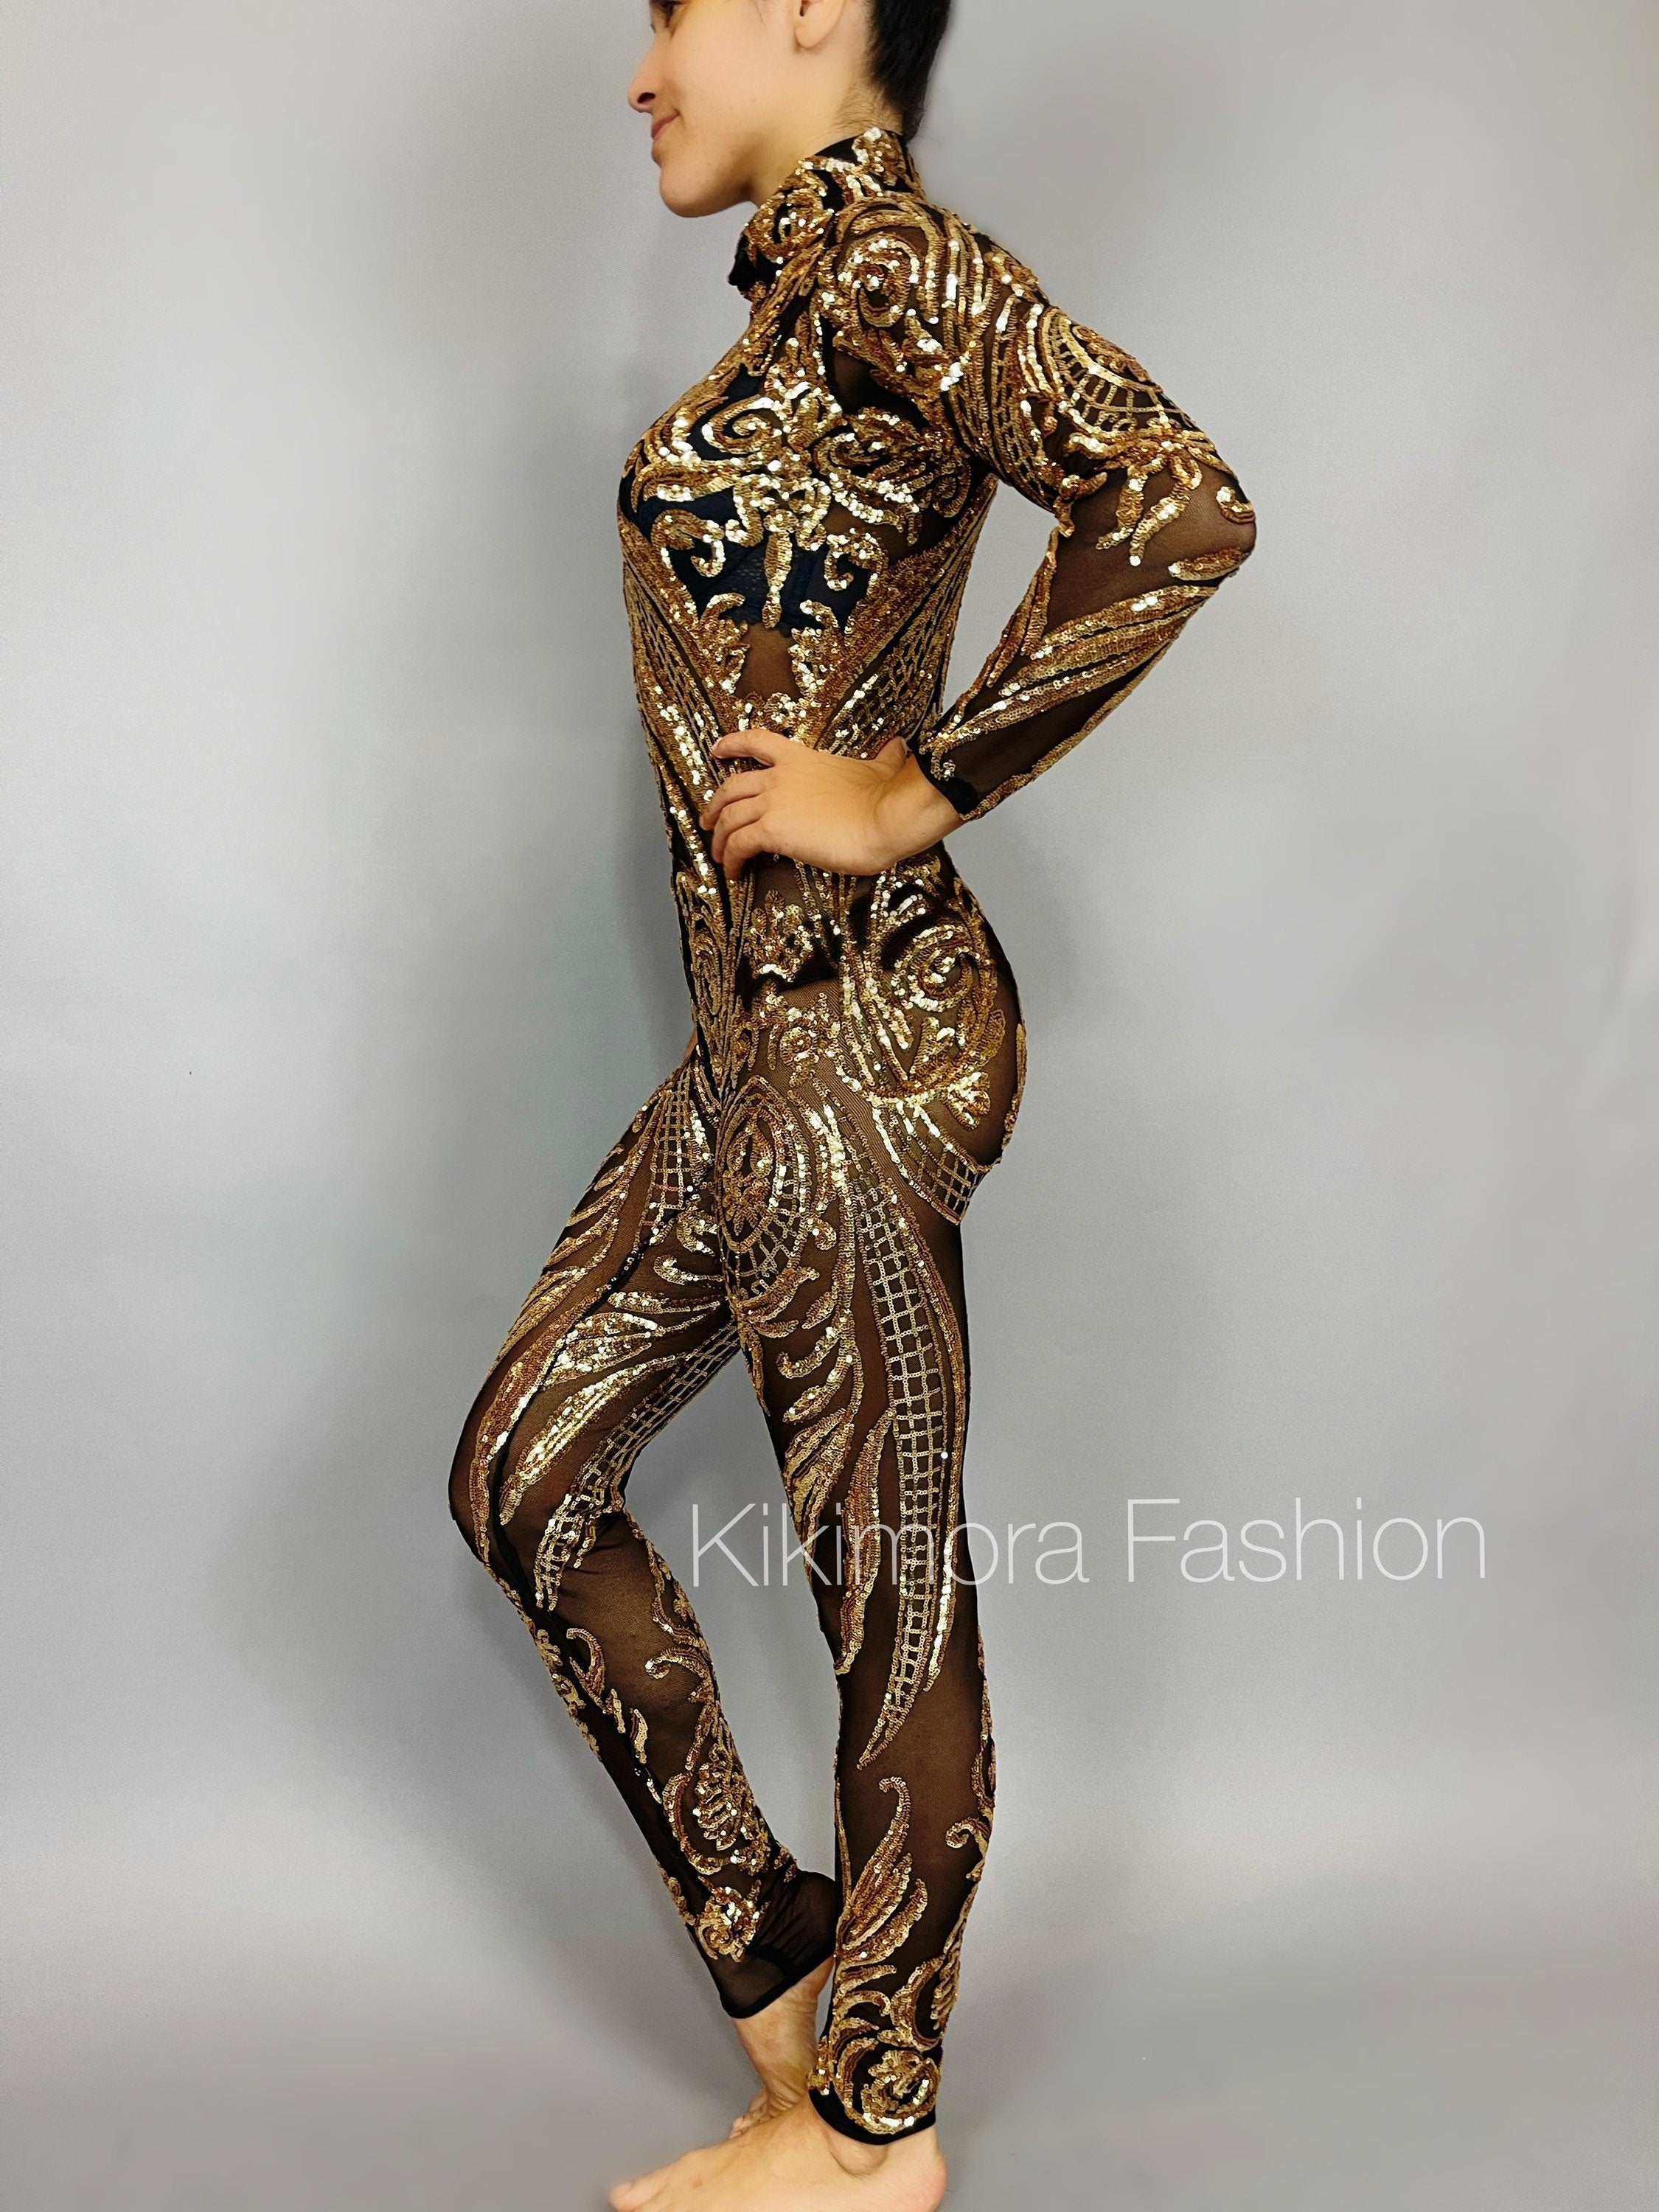 Sequins Catsuit, Headpiece, Gloves, Skirt, Futuristic Clothing, Exotic Dancewear, Circus Party Outfit